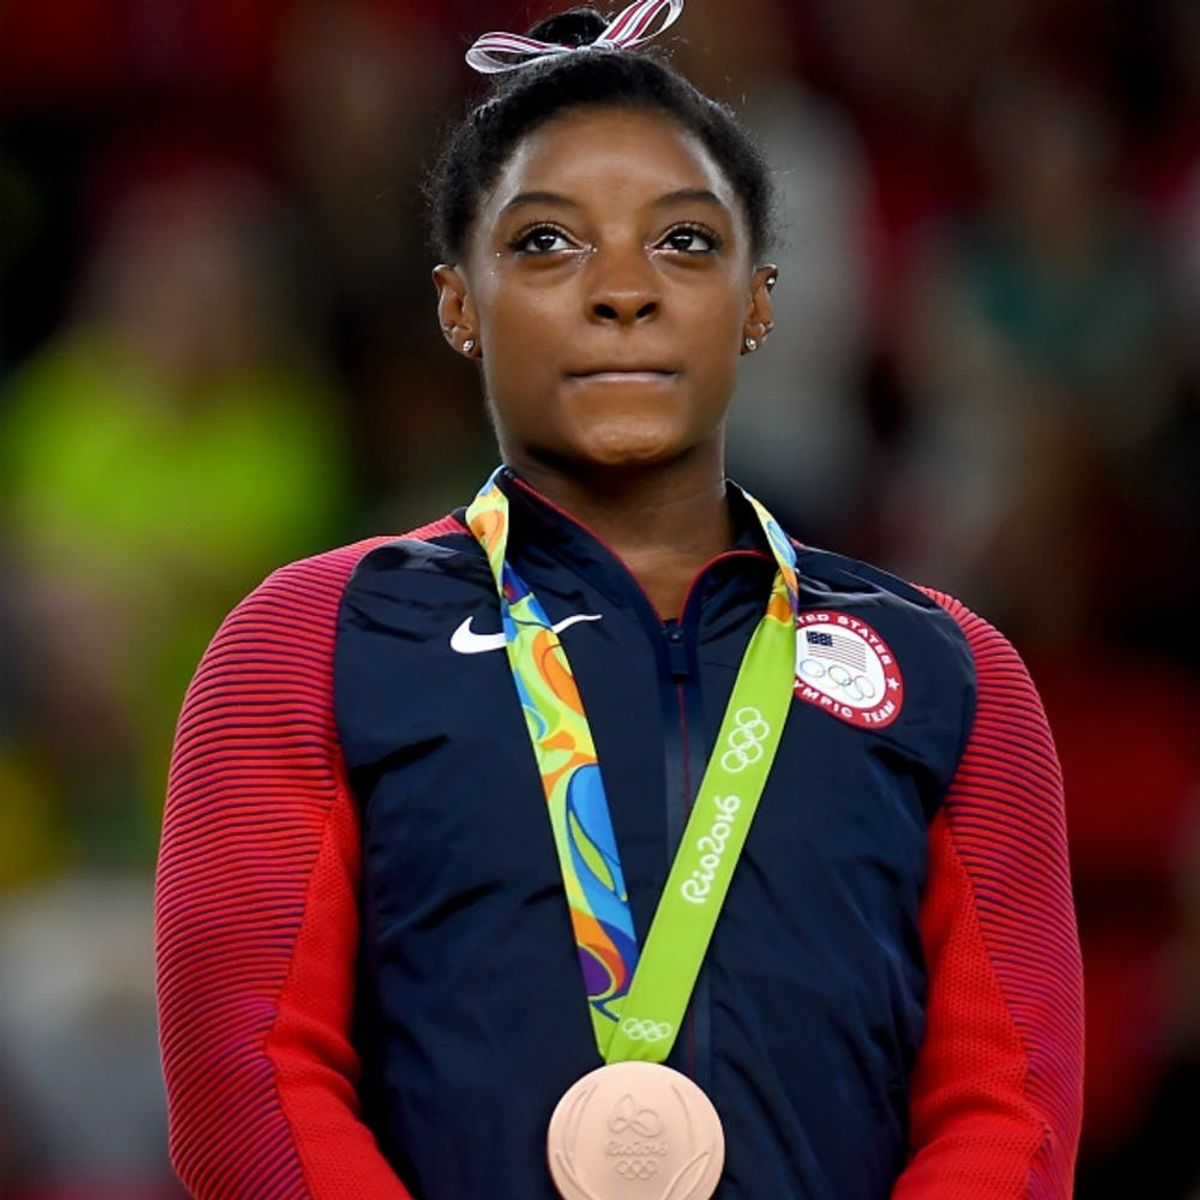 Check Out Simone Biles and Katie Ledecky on the Cover of Sports Illustrated